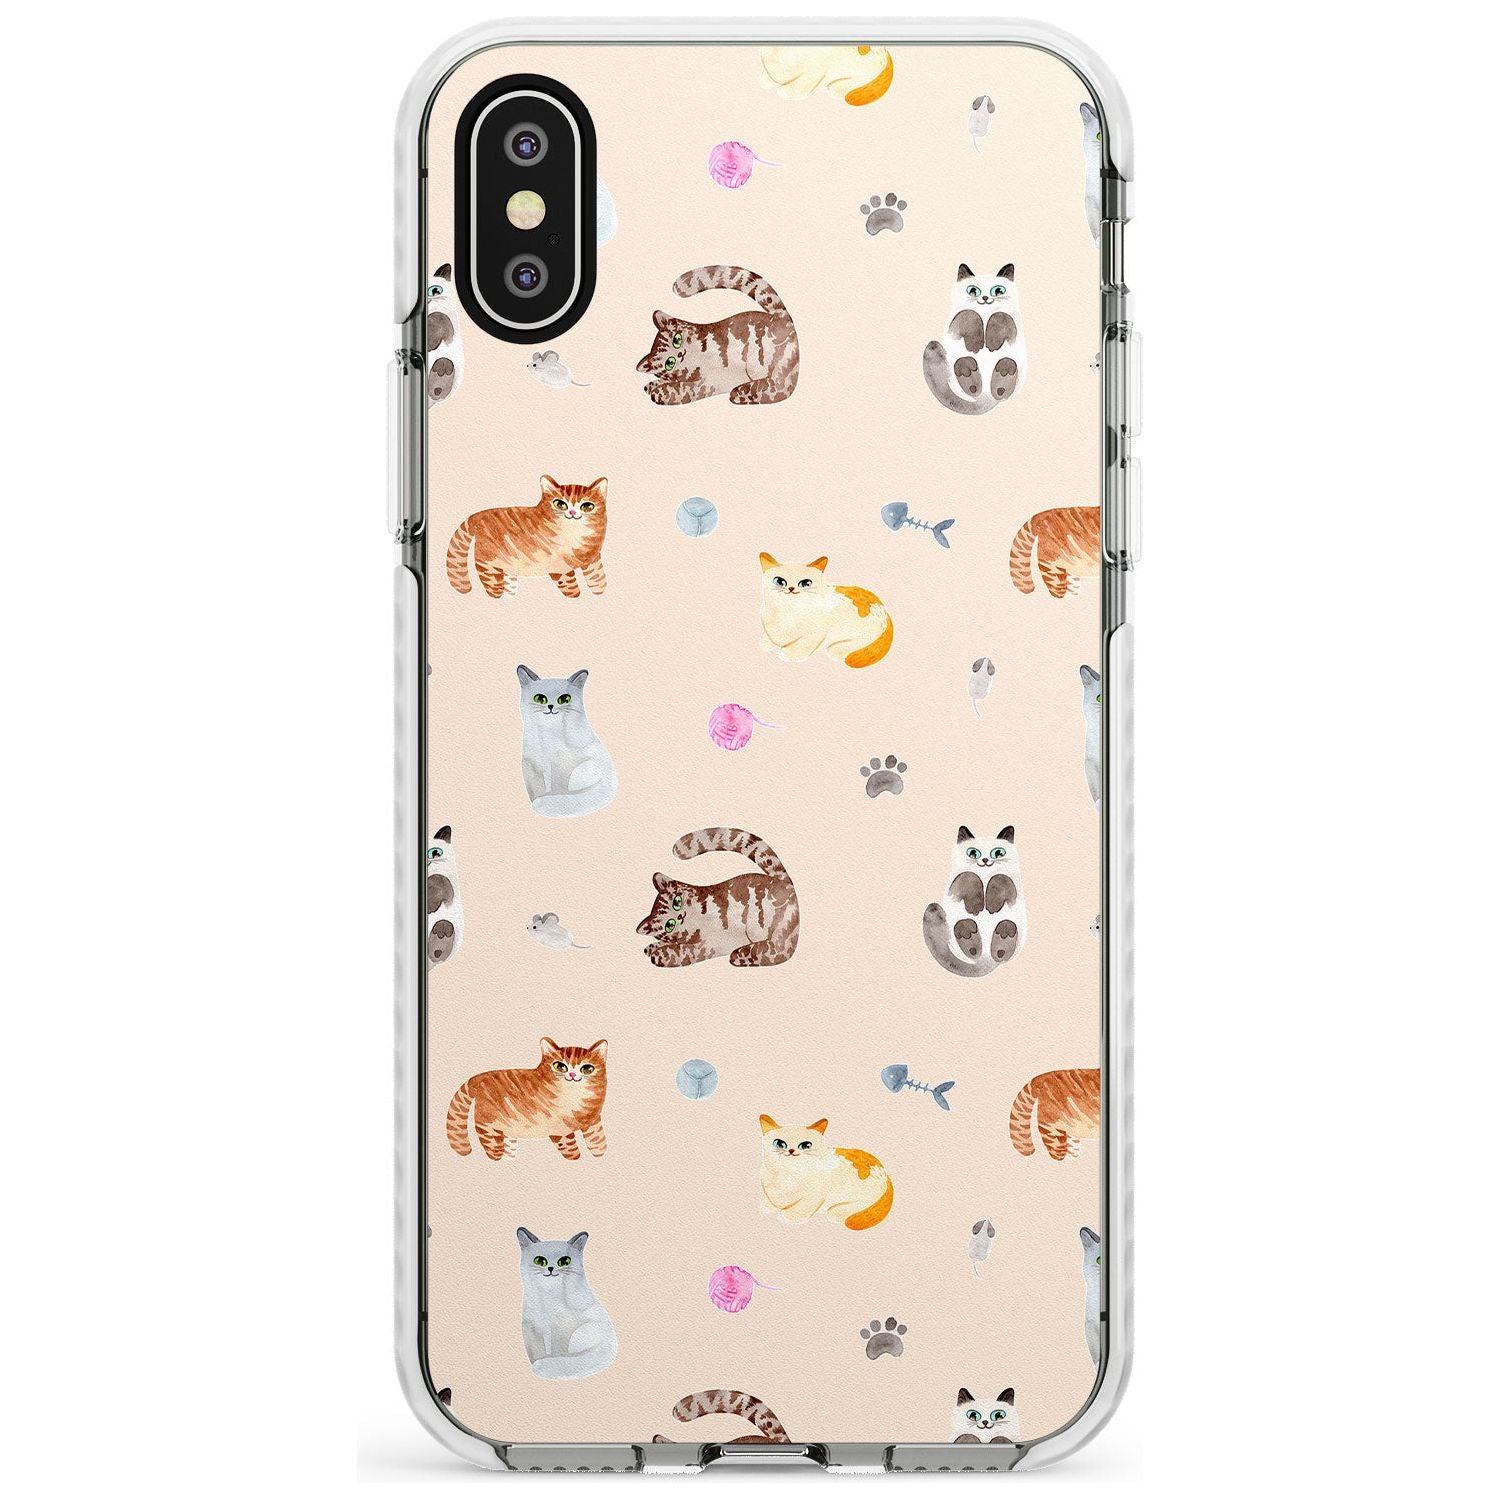 Cats with Toys Slim TPU Phone Case Warehouse X XS Max XR